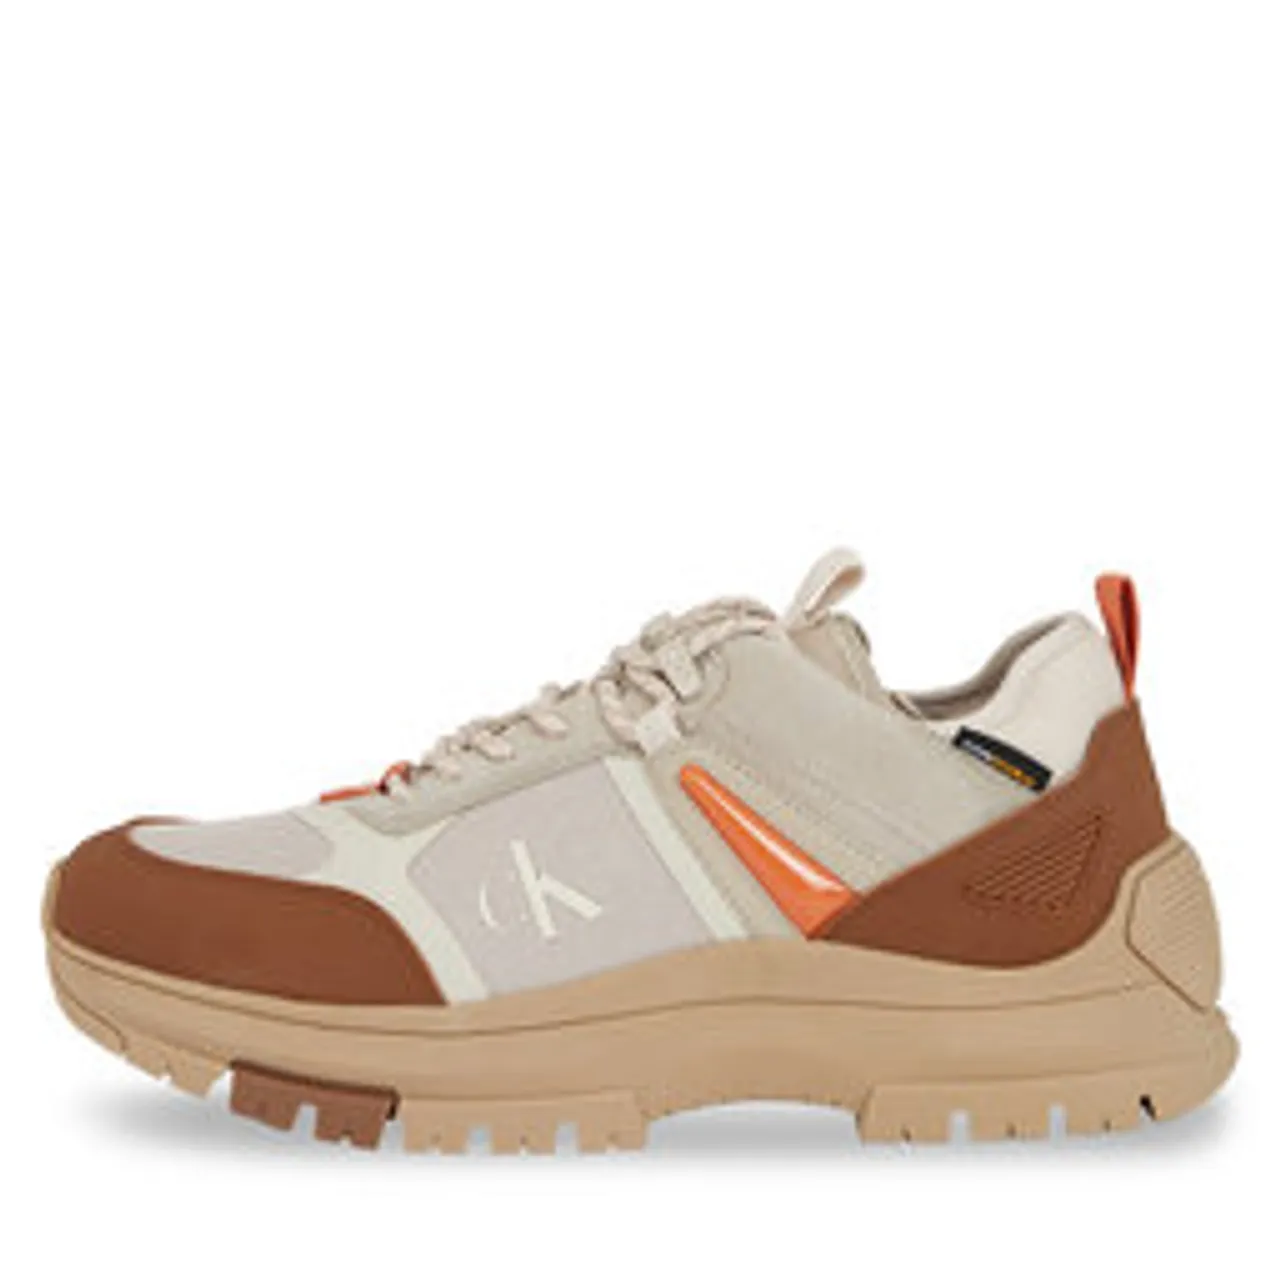 Sneakers Calvin Klein Jeans Hiking Lace Up Low Cor YM0YM00801 Plaza Taupe/Eggshell/Brown Sugar 0HI